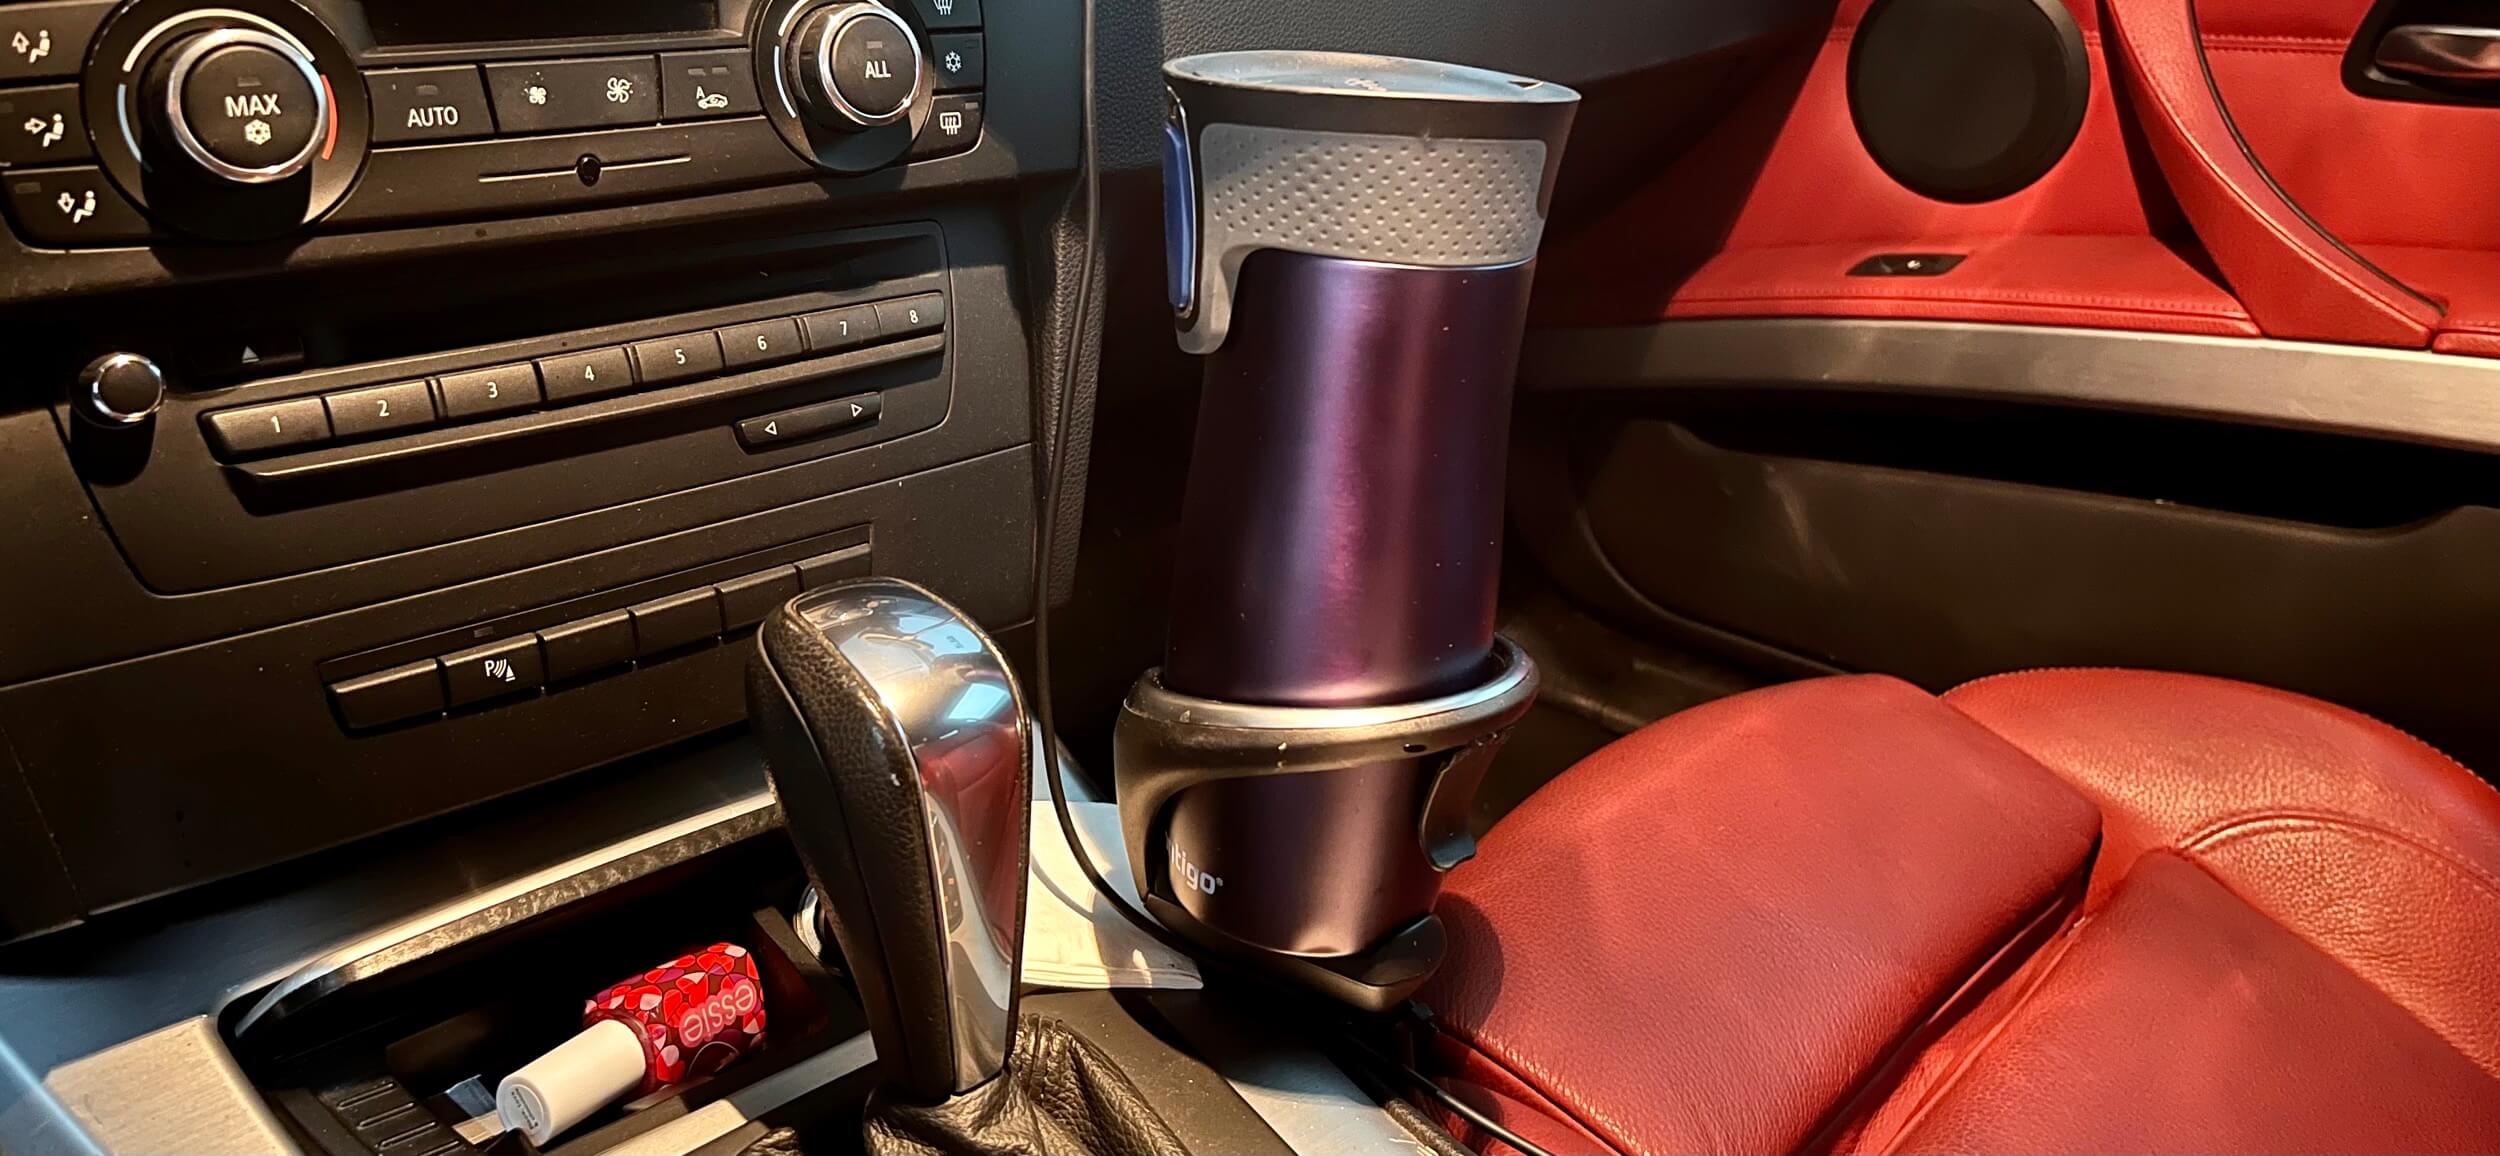 Missing cup holder bias - or how a minor thing can destroy your entire experience completely